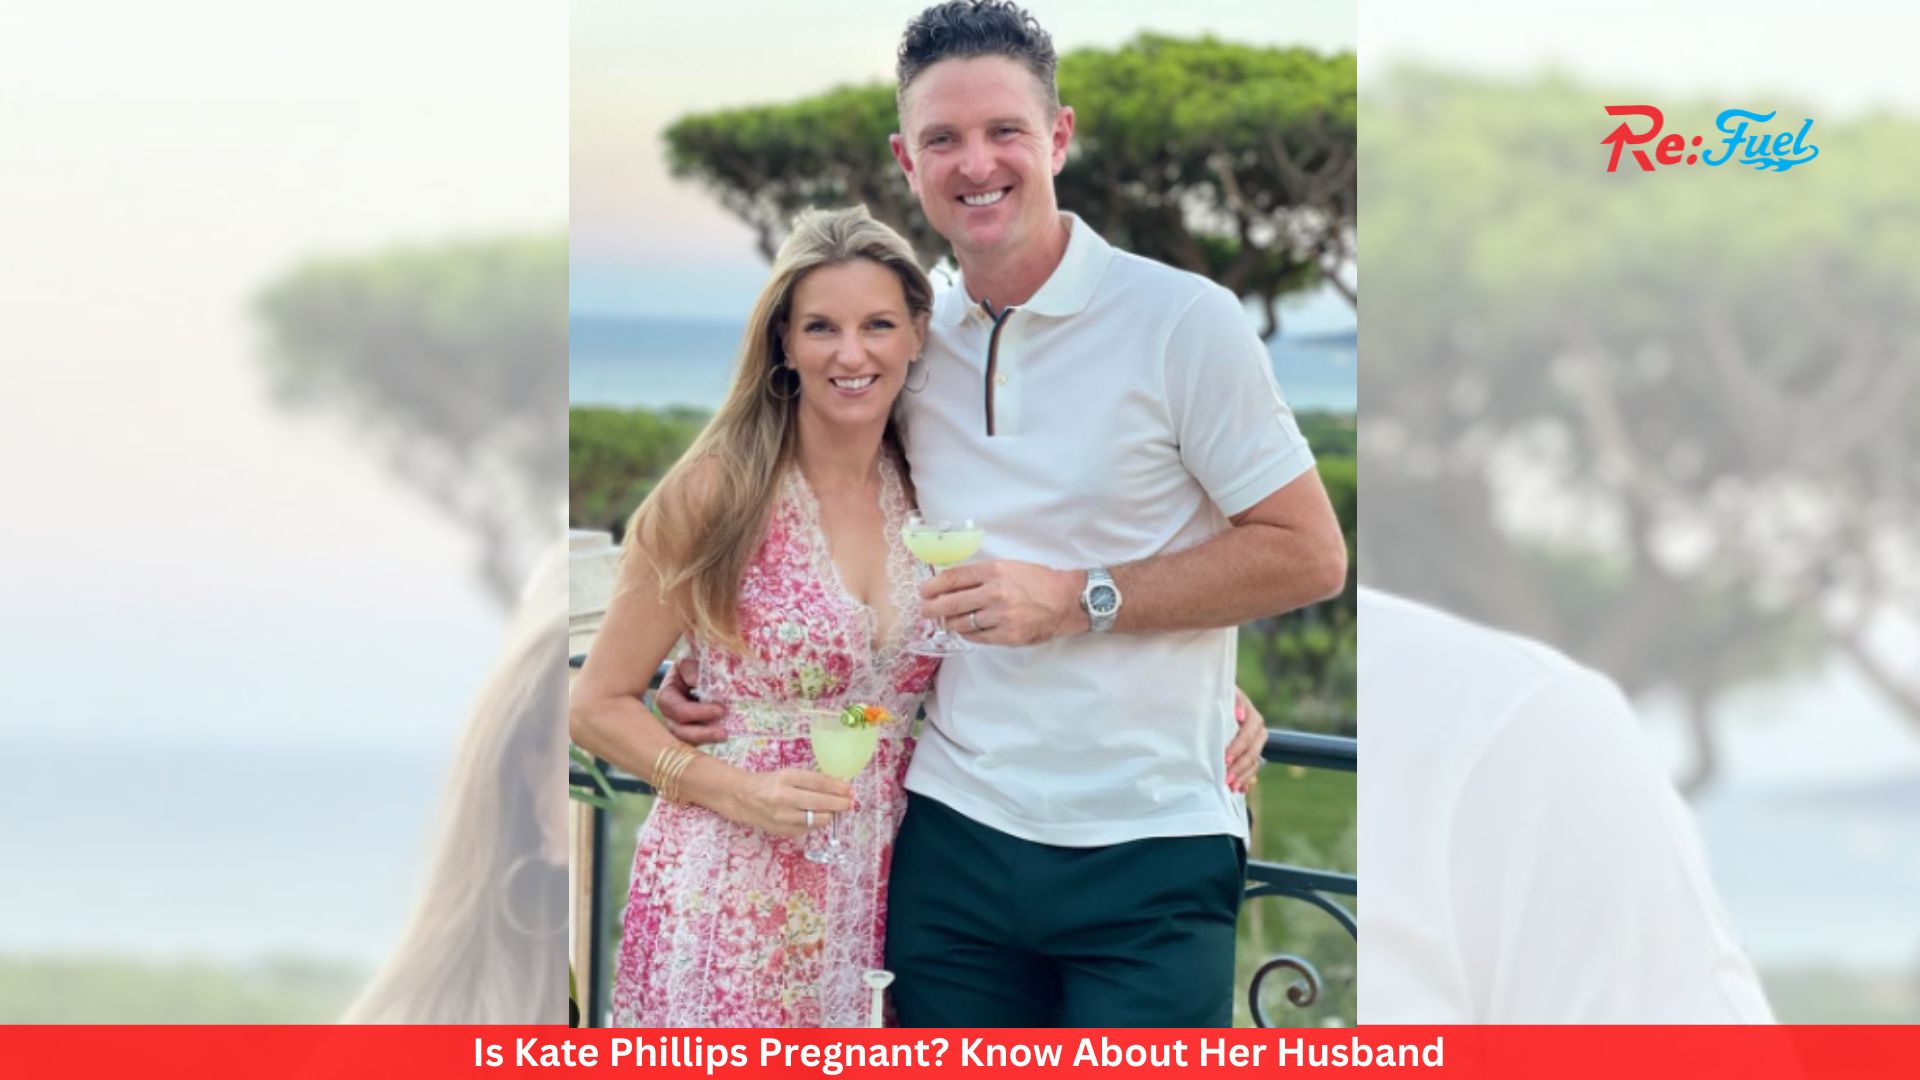 Is Kate Phillips Pregnant? Know About Her Husband